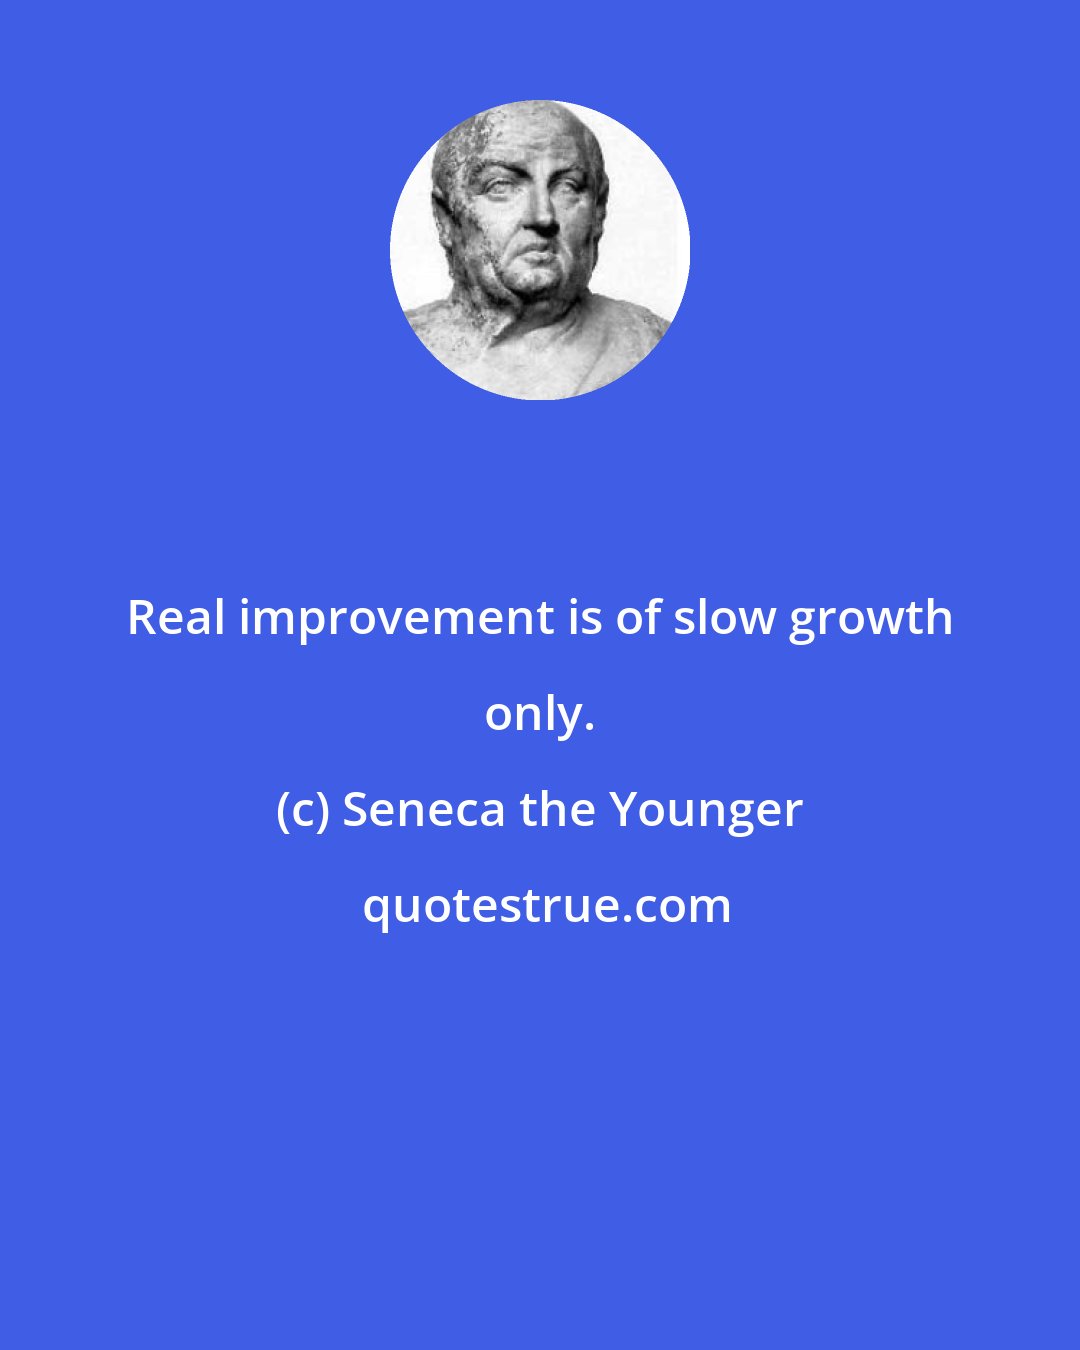 Seneca the Younger: Real improvement is of slow growth only.